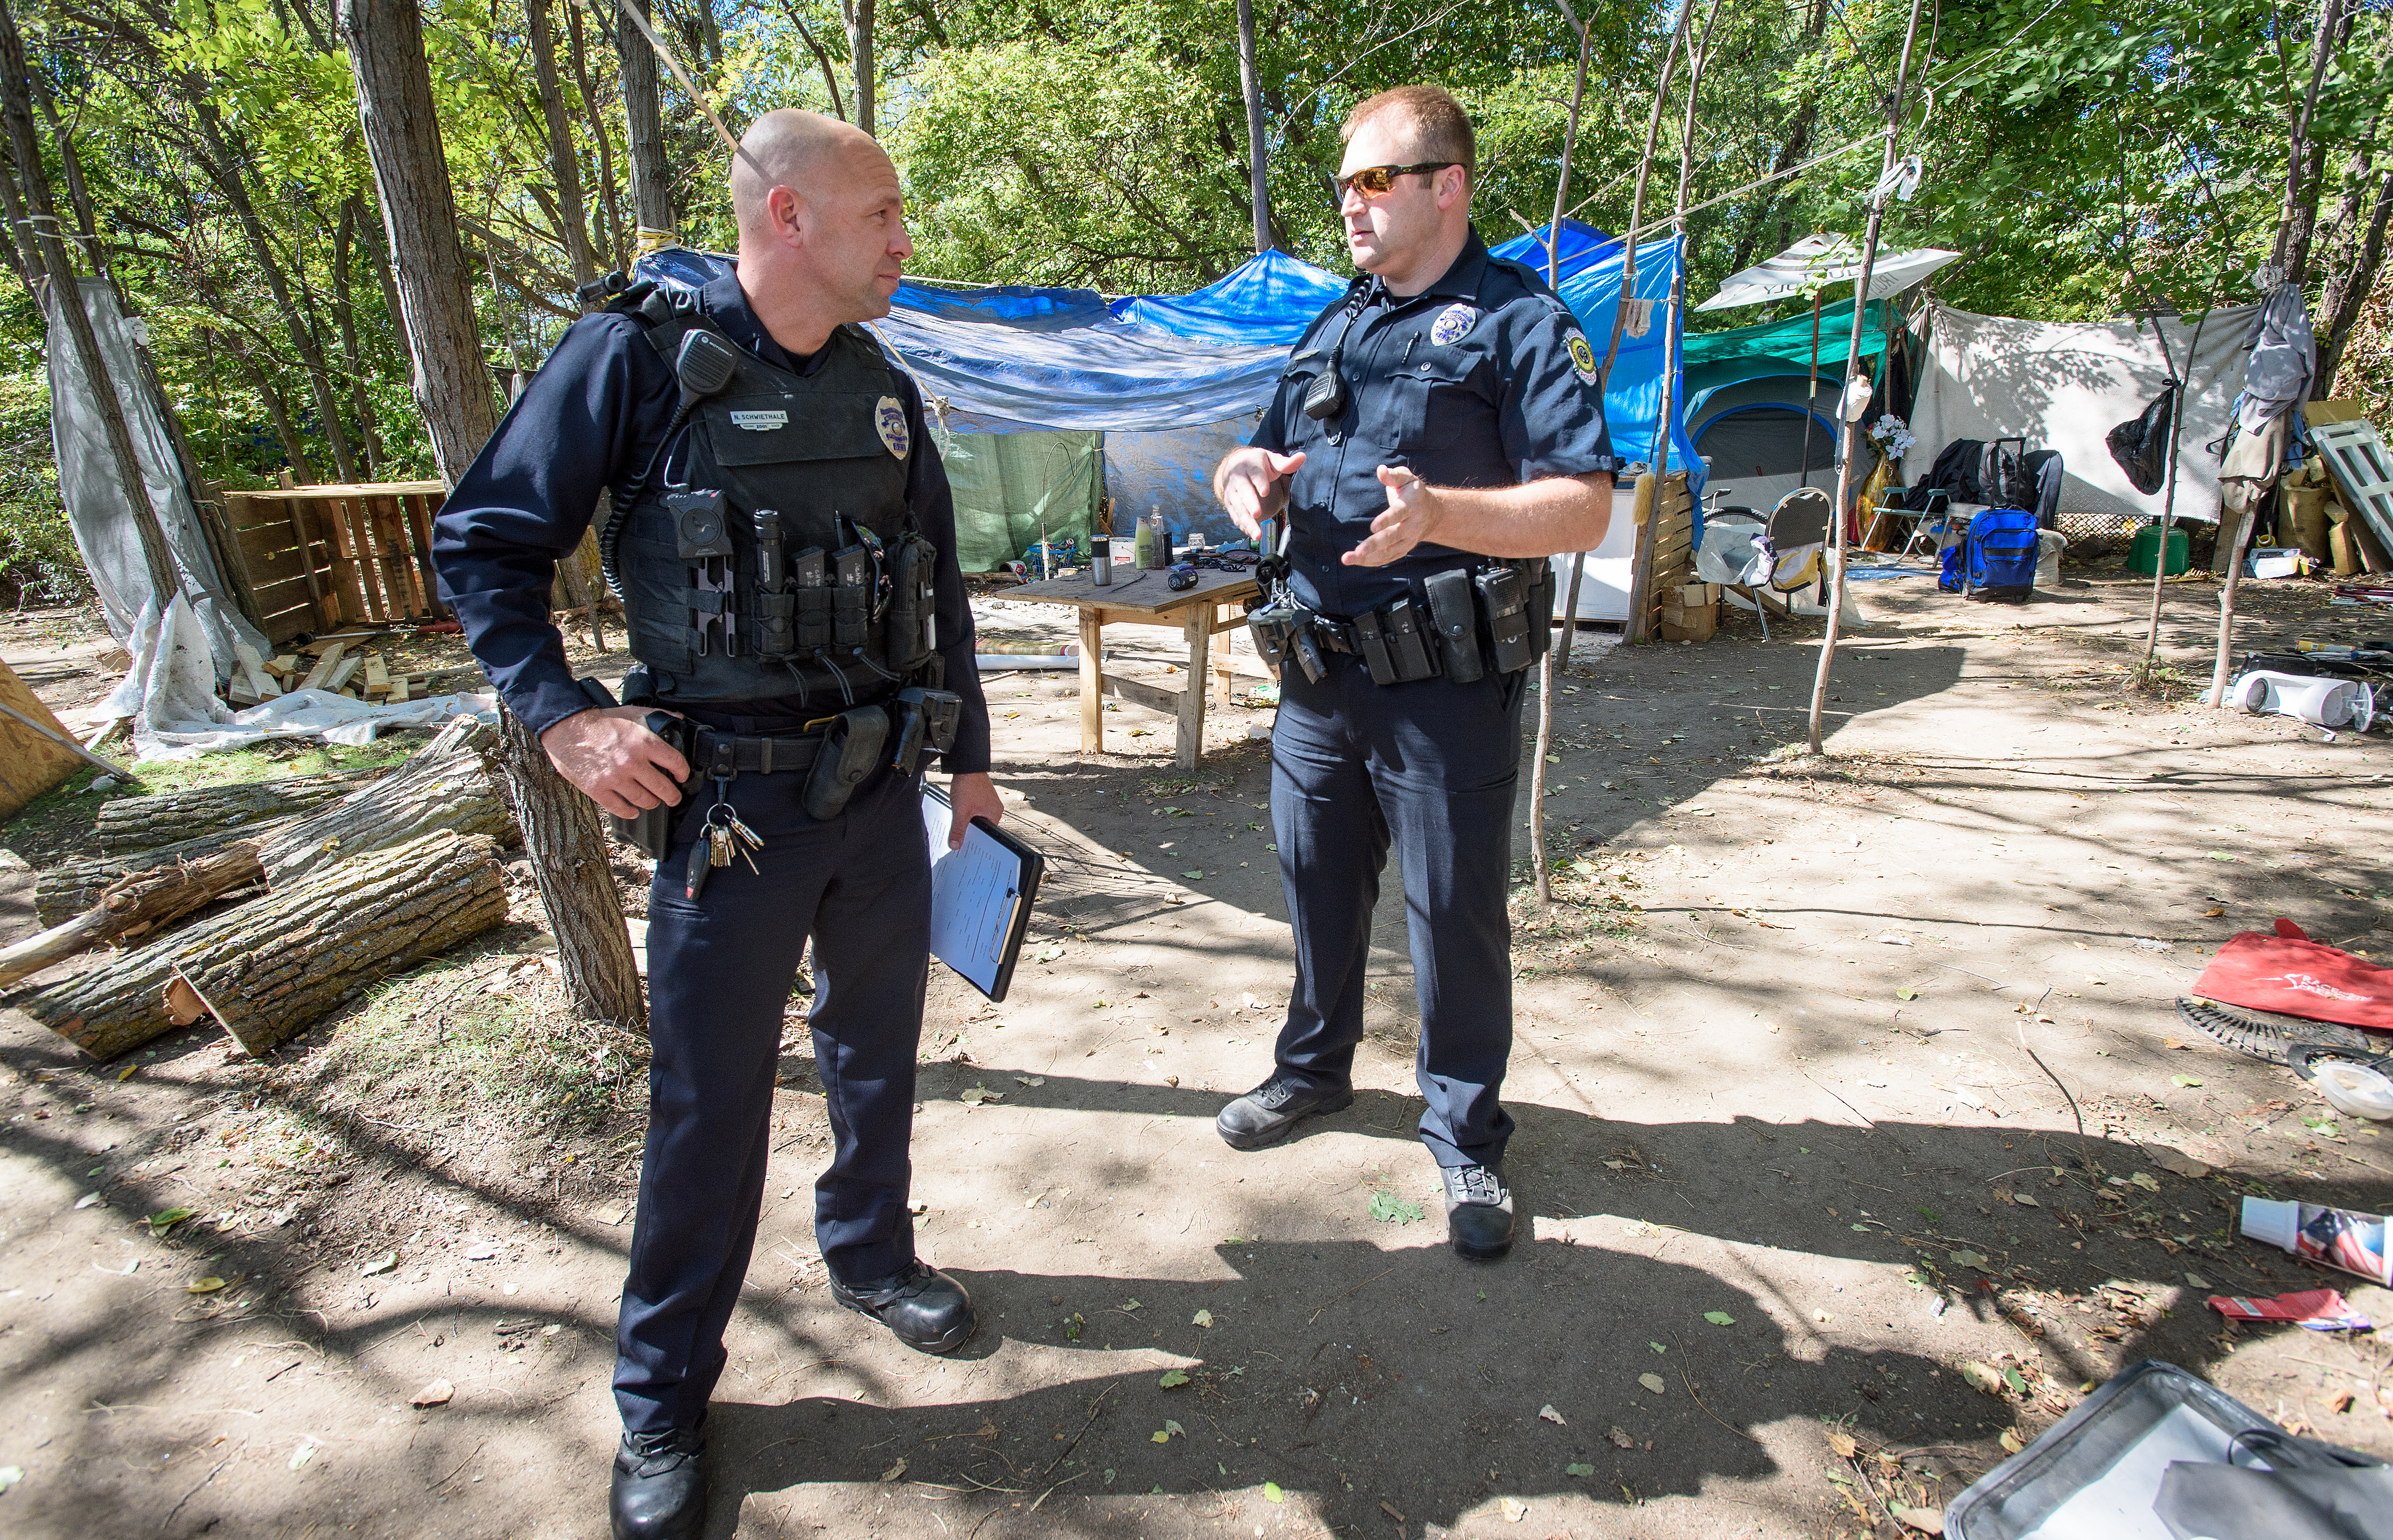 Officers Nate Schweithale and Matthew Lowe of the Wichita, Kansas Police Department Homeless Outreach Team prepare to conduct outreach at an encampment along the Arkansas River